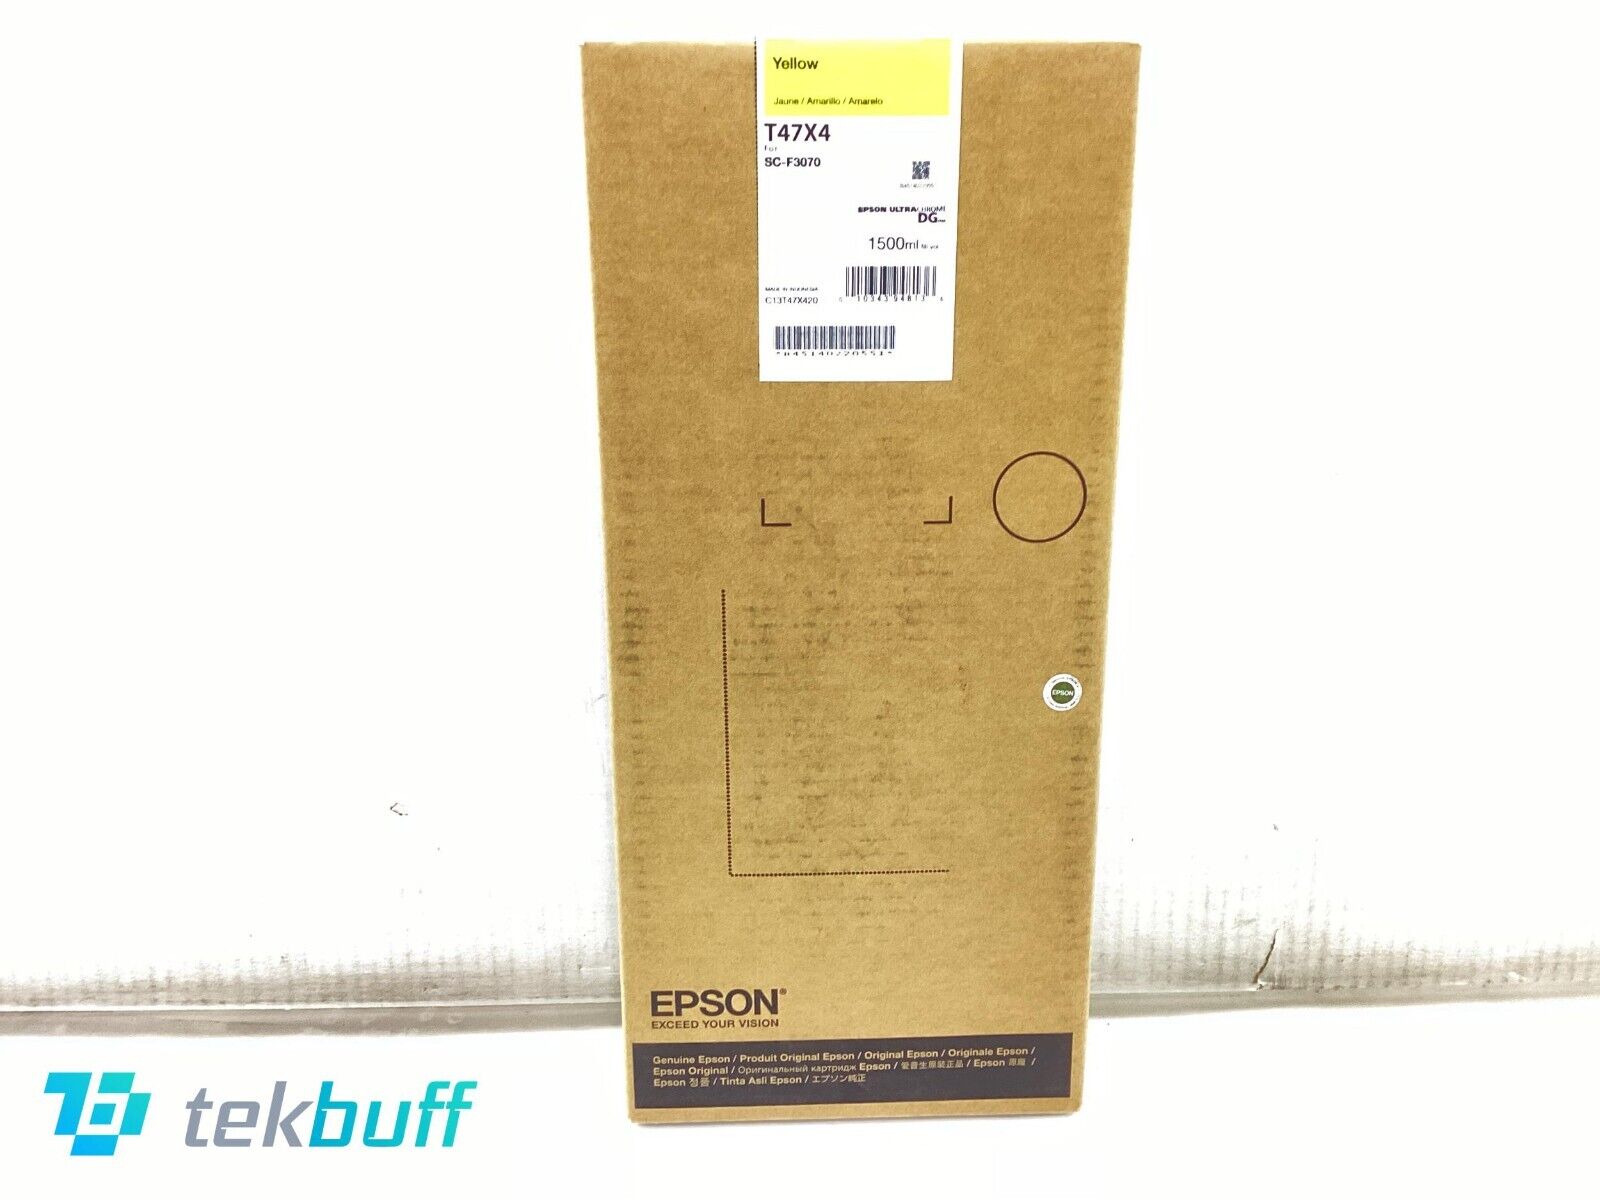 Epson T47X420 UltraChrome DG Yellow Ink Pack 1500mL For SureColor F3070